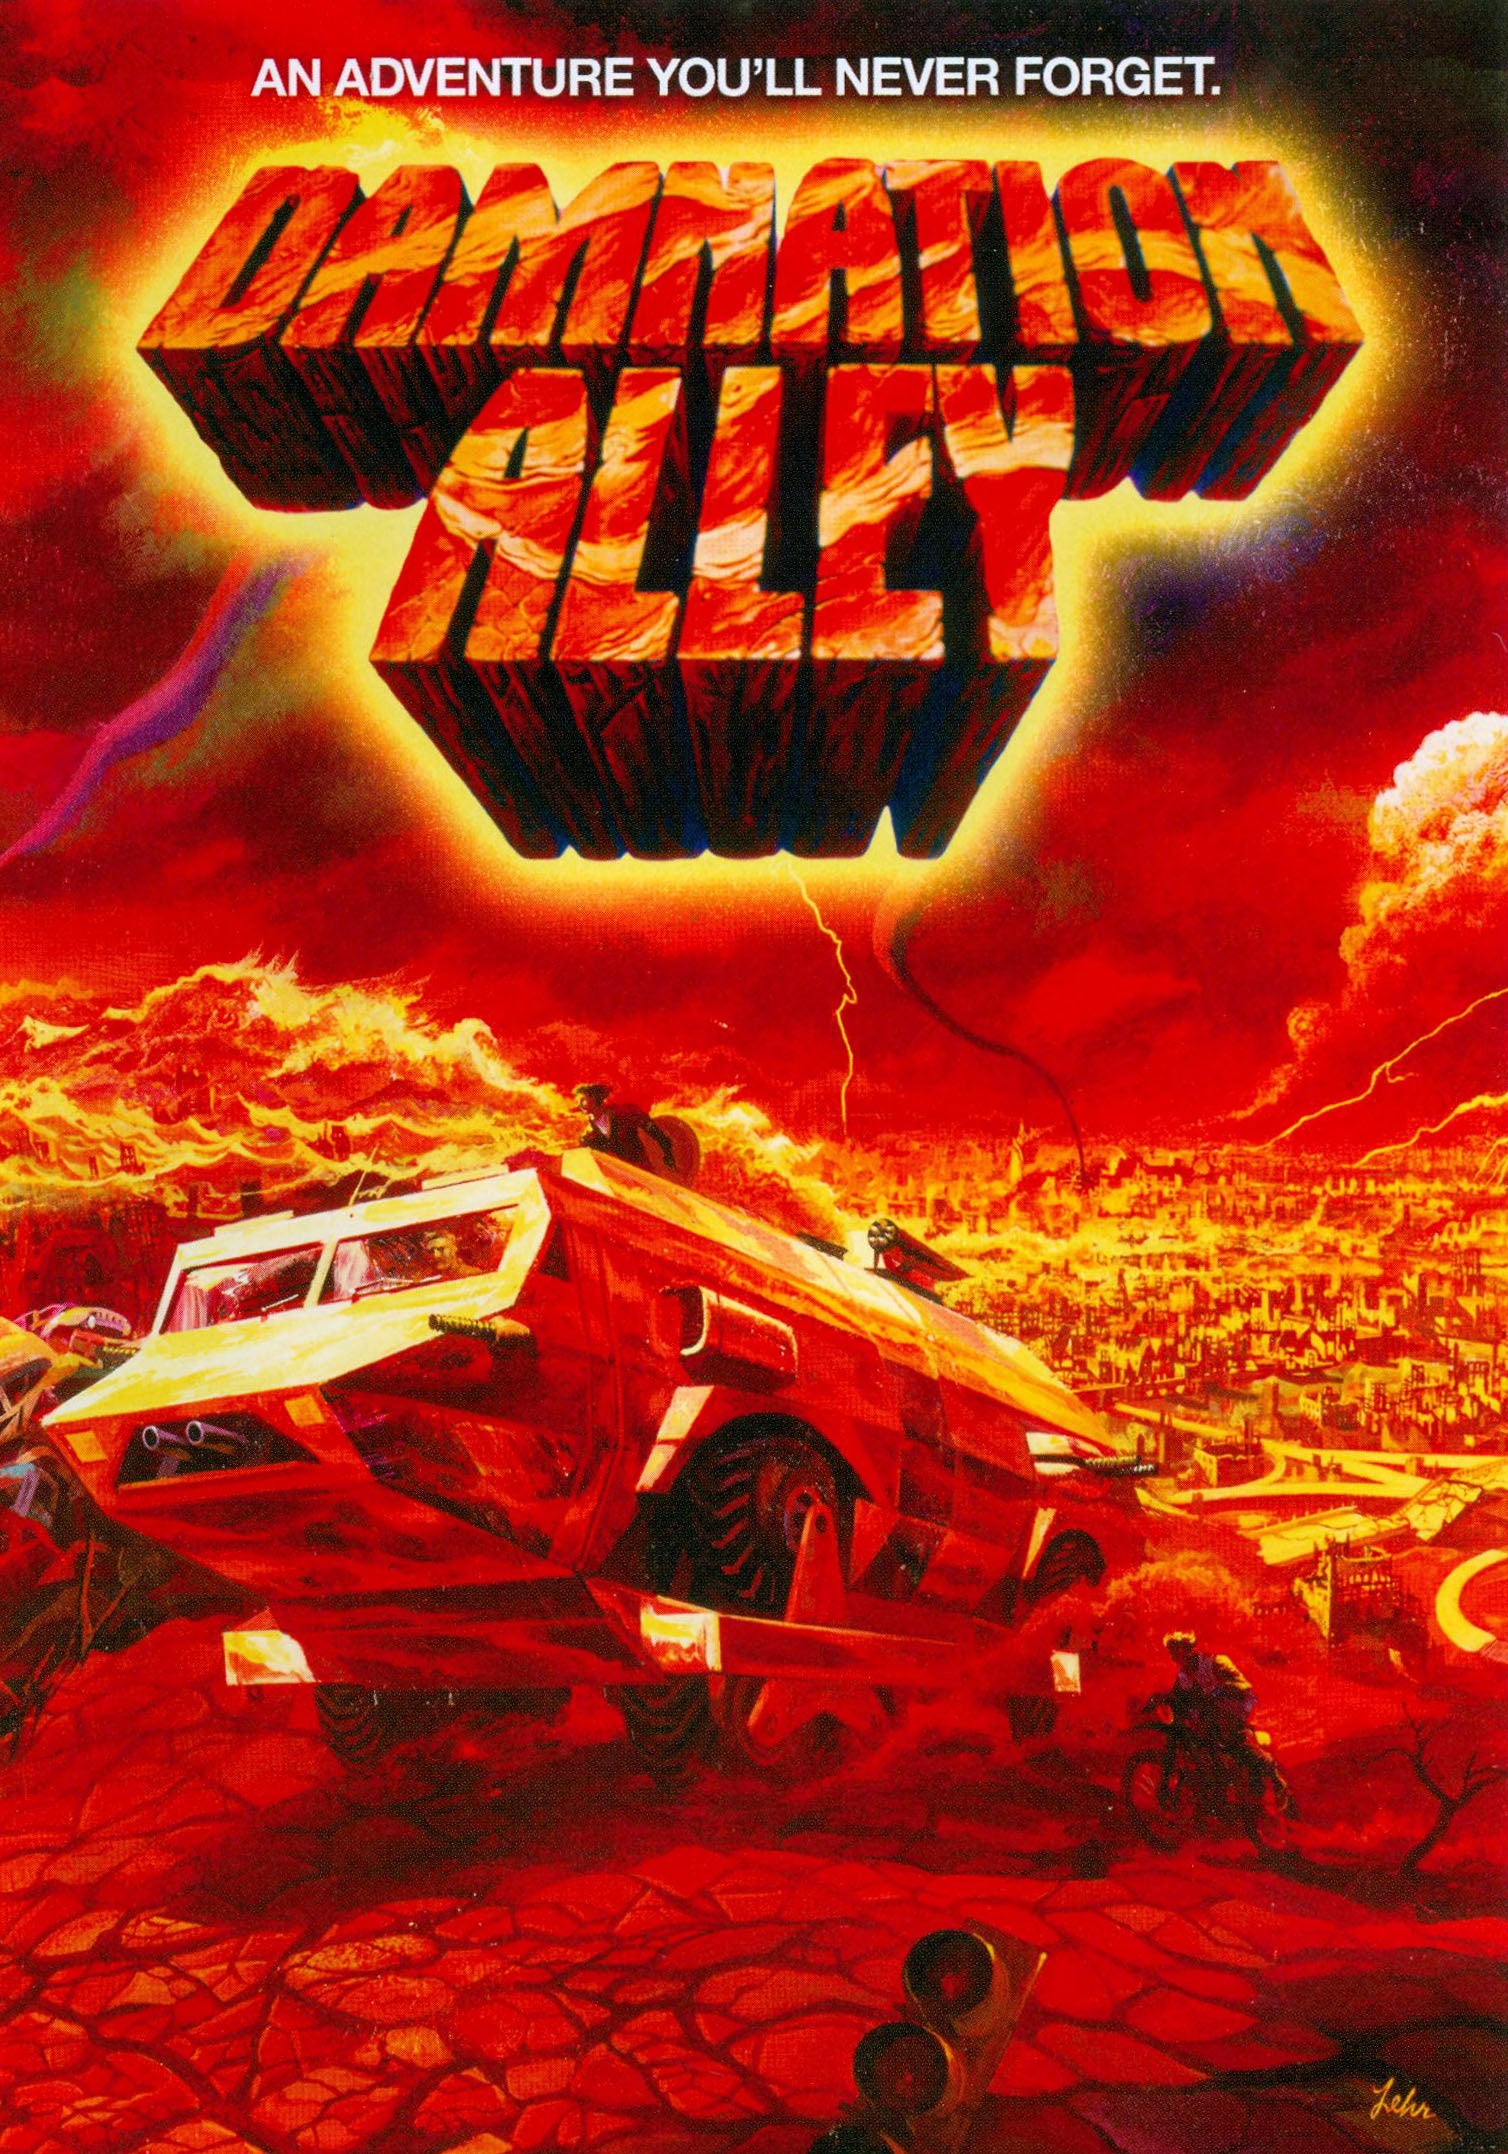 Damnation Alley cover art